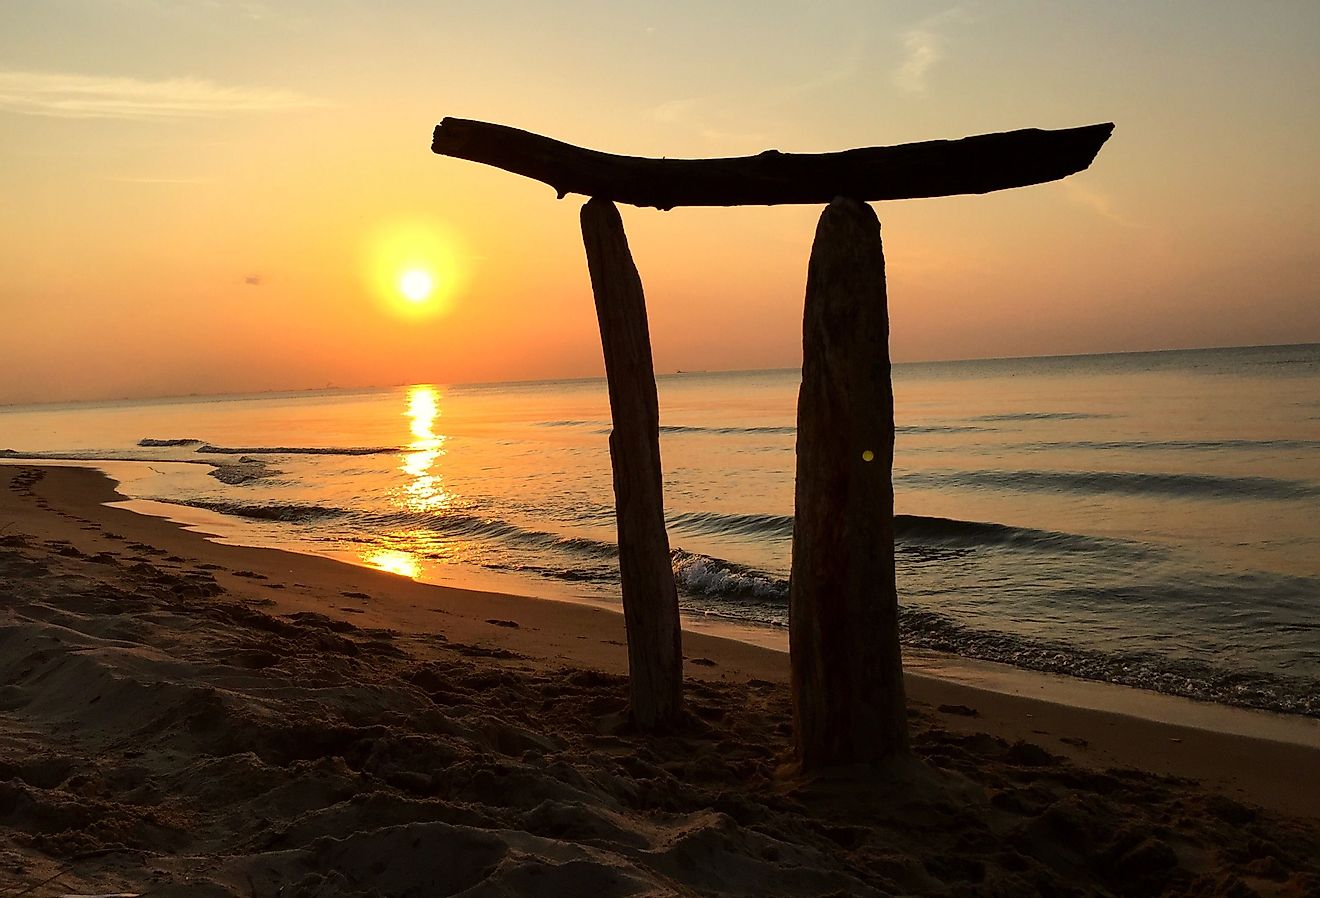 Wooden arch on the sunset beaches of Lake Michigan. Image credit Tommy Images via Shutterstock.